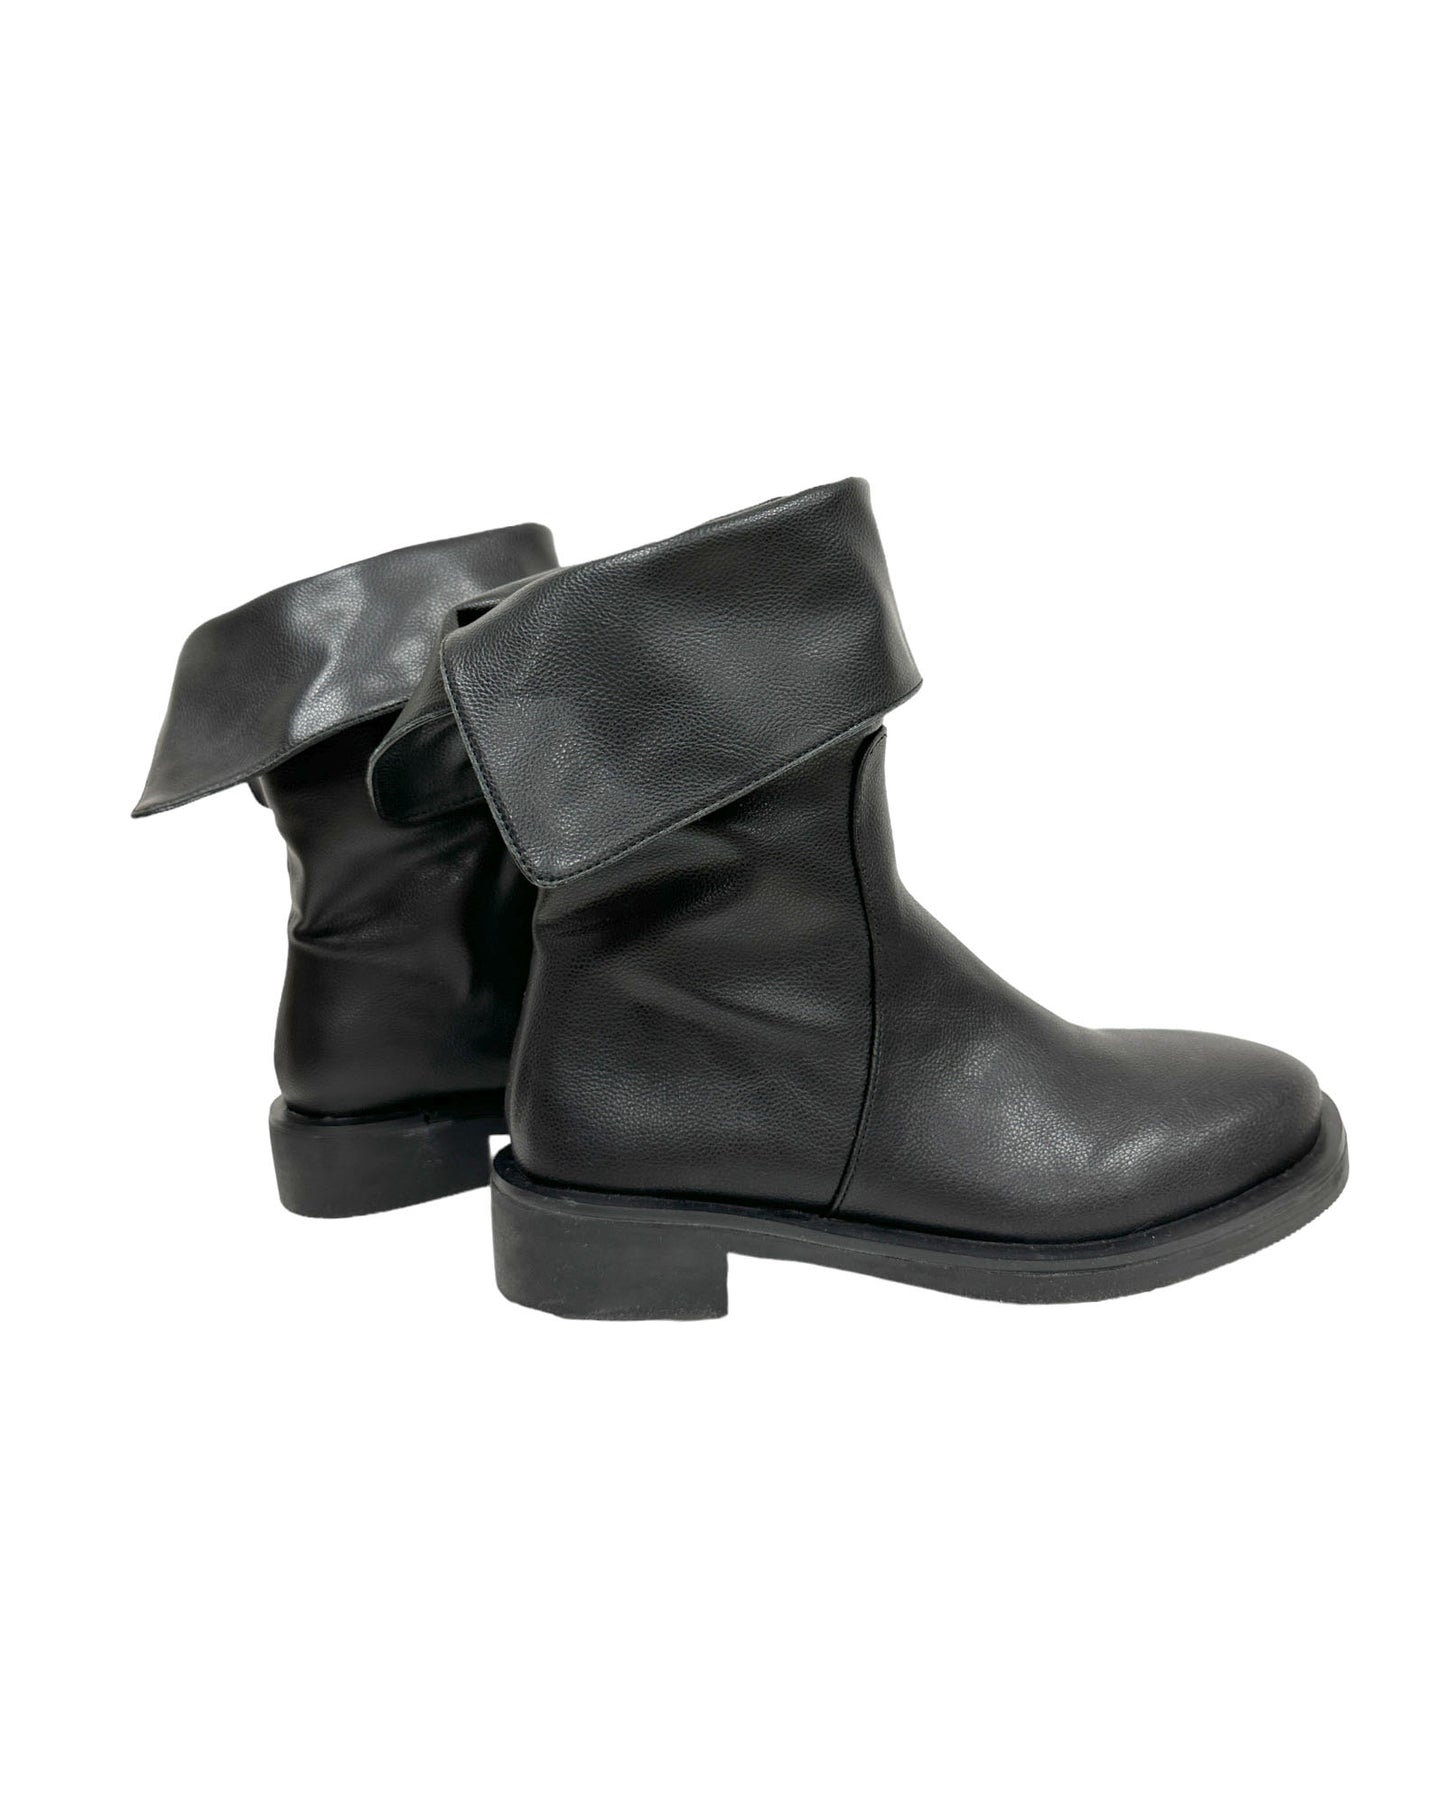 black leather fold over boots - 35, 37